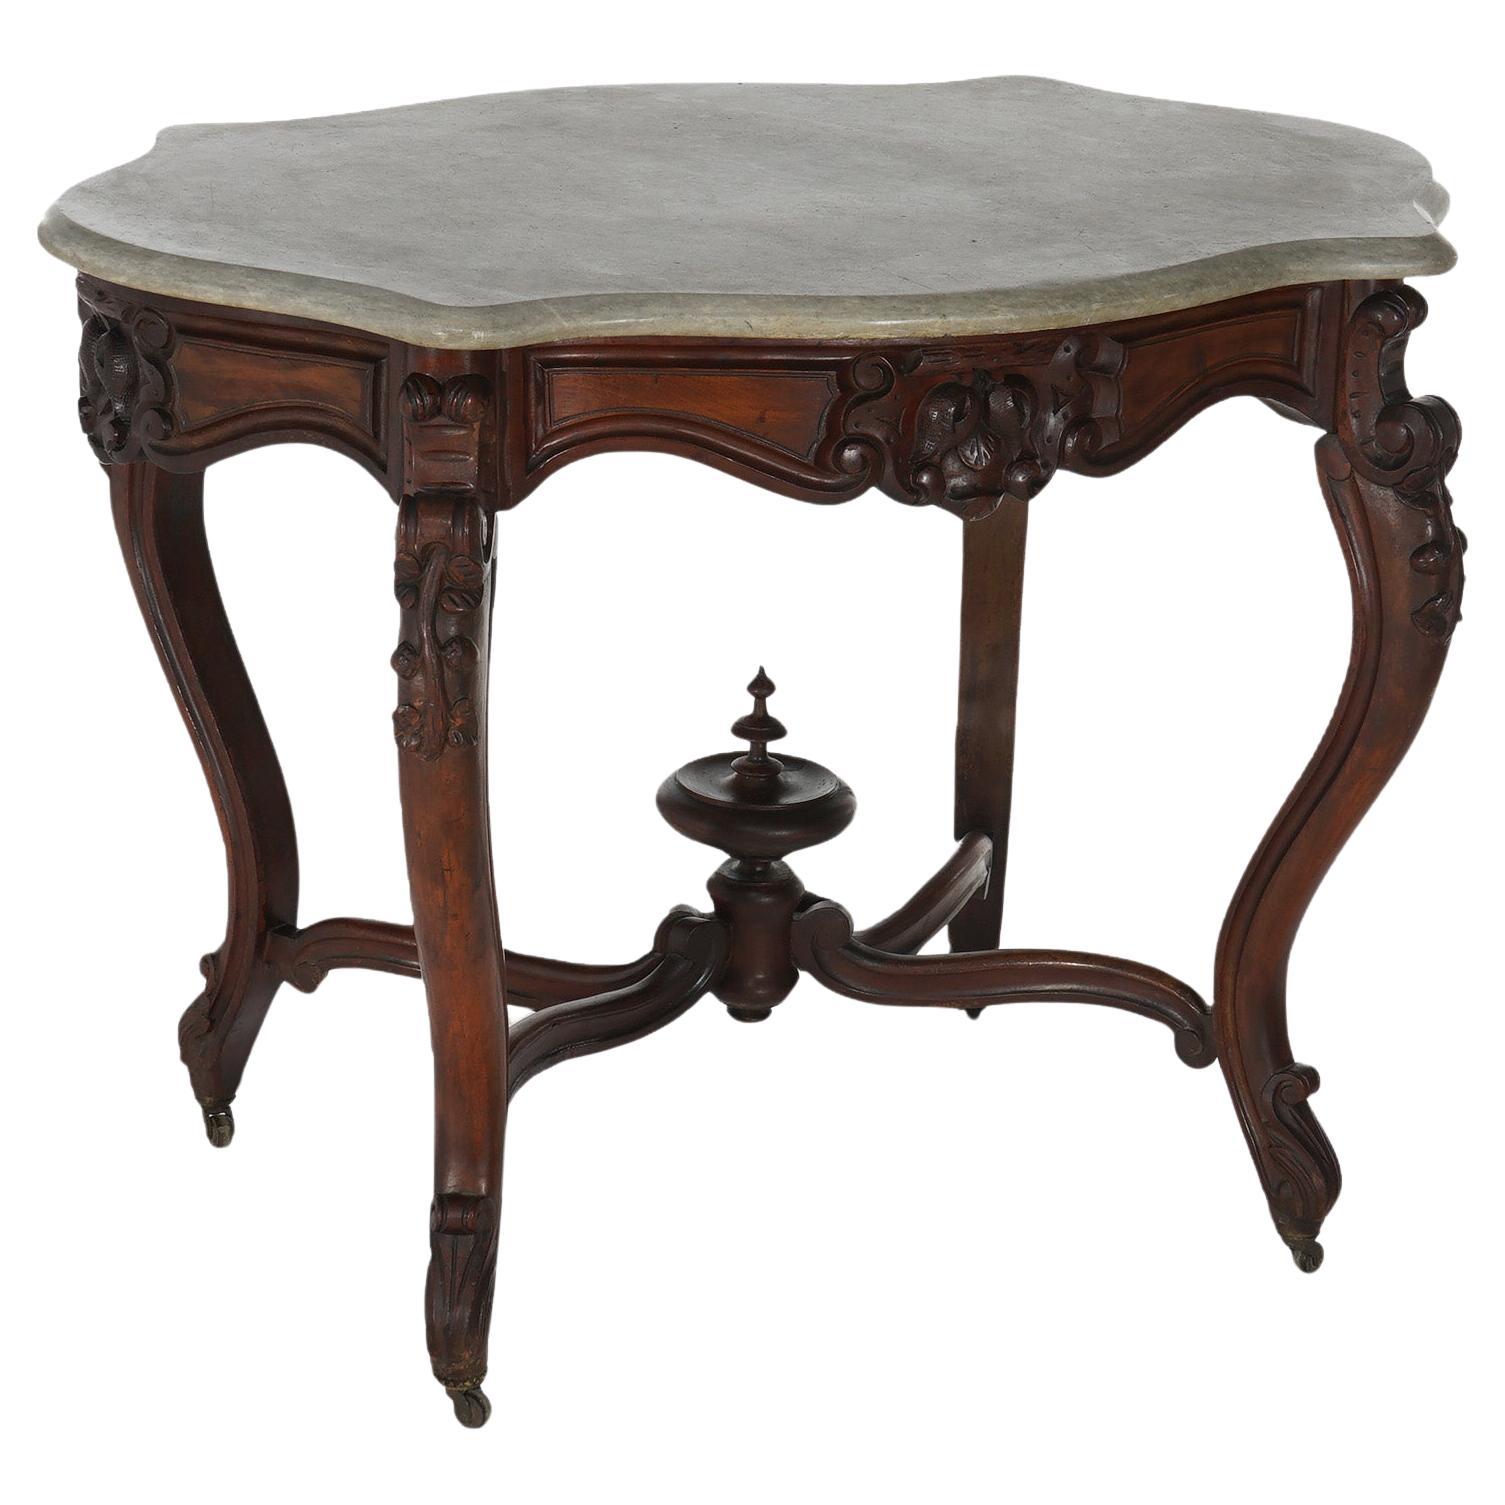 Antique Victorian Rococo Carved Walnut & Marble Top Parlor Table C1800 For Sale